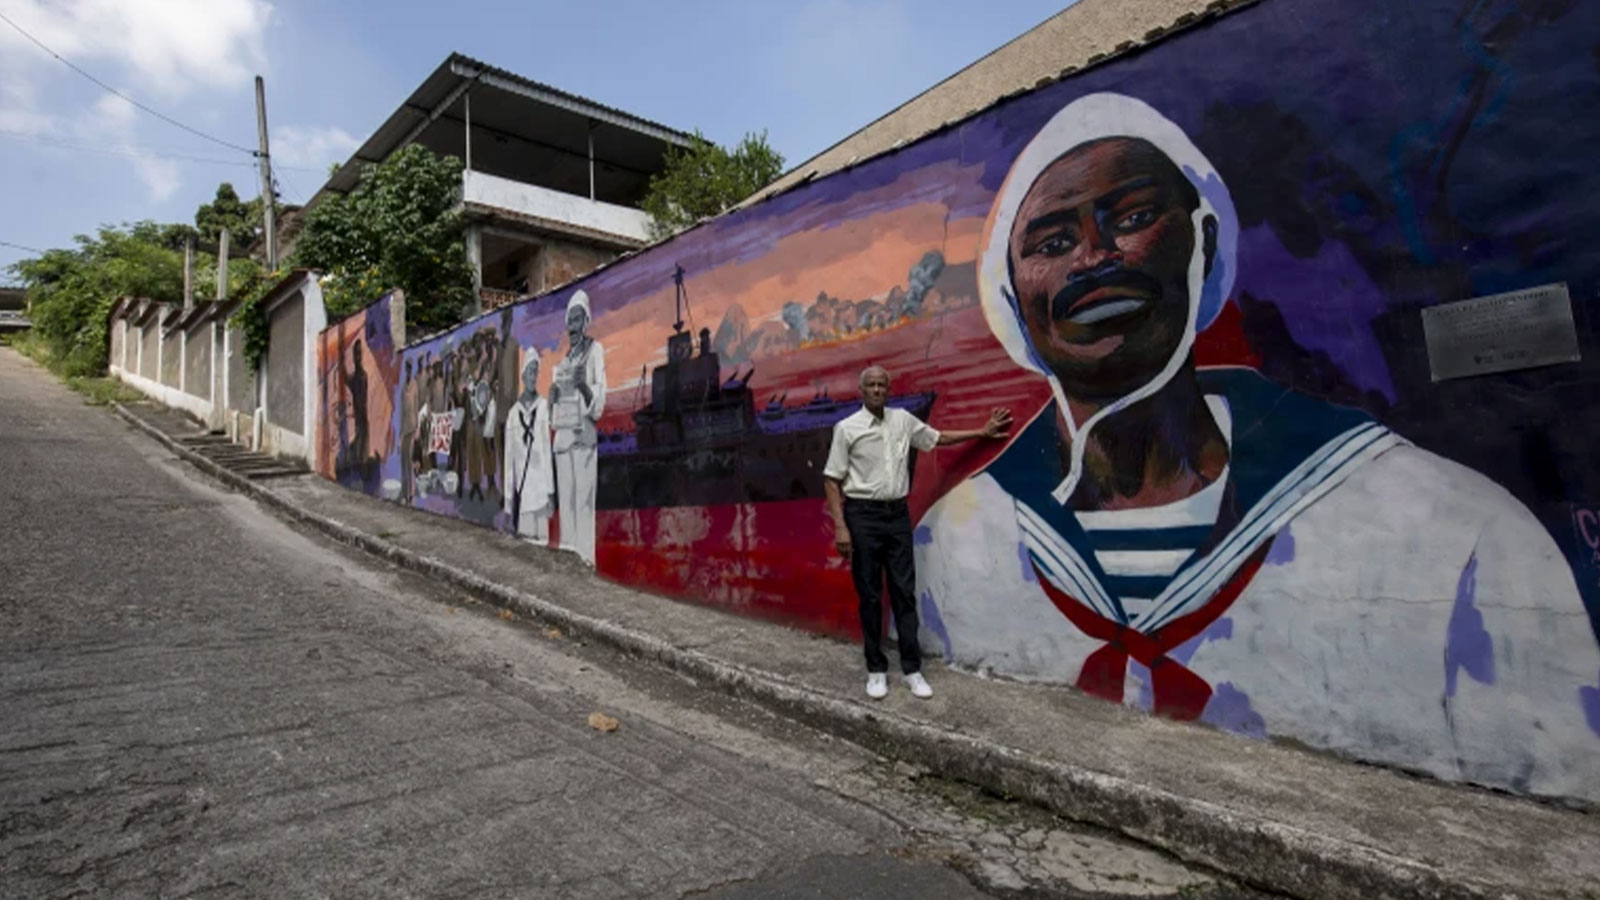 Adalberto Cândido poses for a photo in front of a mural that depicts the story of his father João Cândido, a black sailor who led a revolt against the Brazilian Navy, in Sao Joao de Meriti, Rio de Janeiro state, Brazil, Thursday, Dec. 21, 2023.